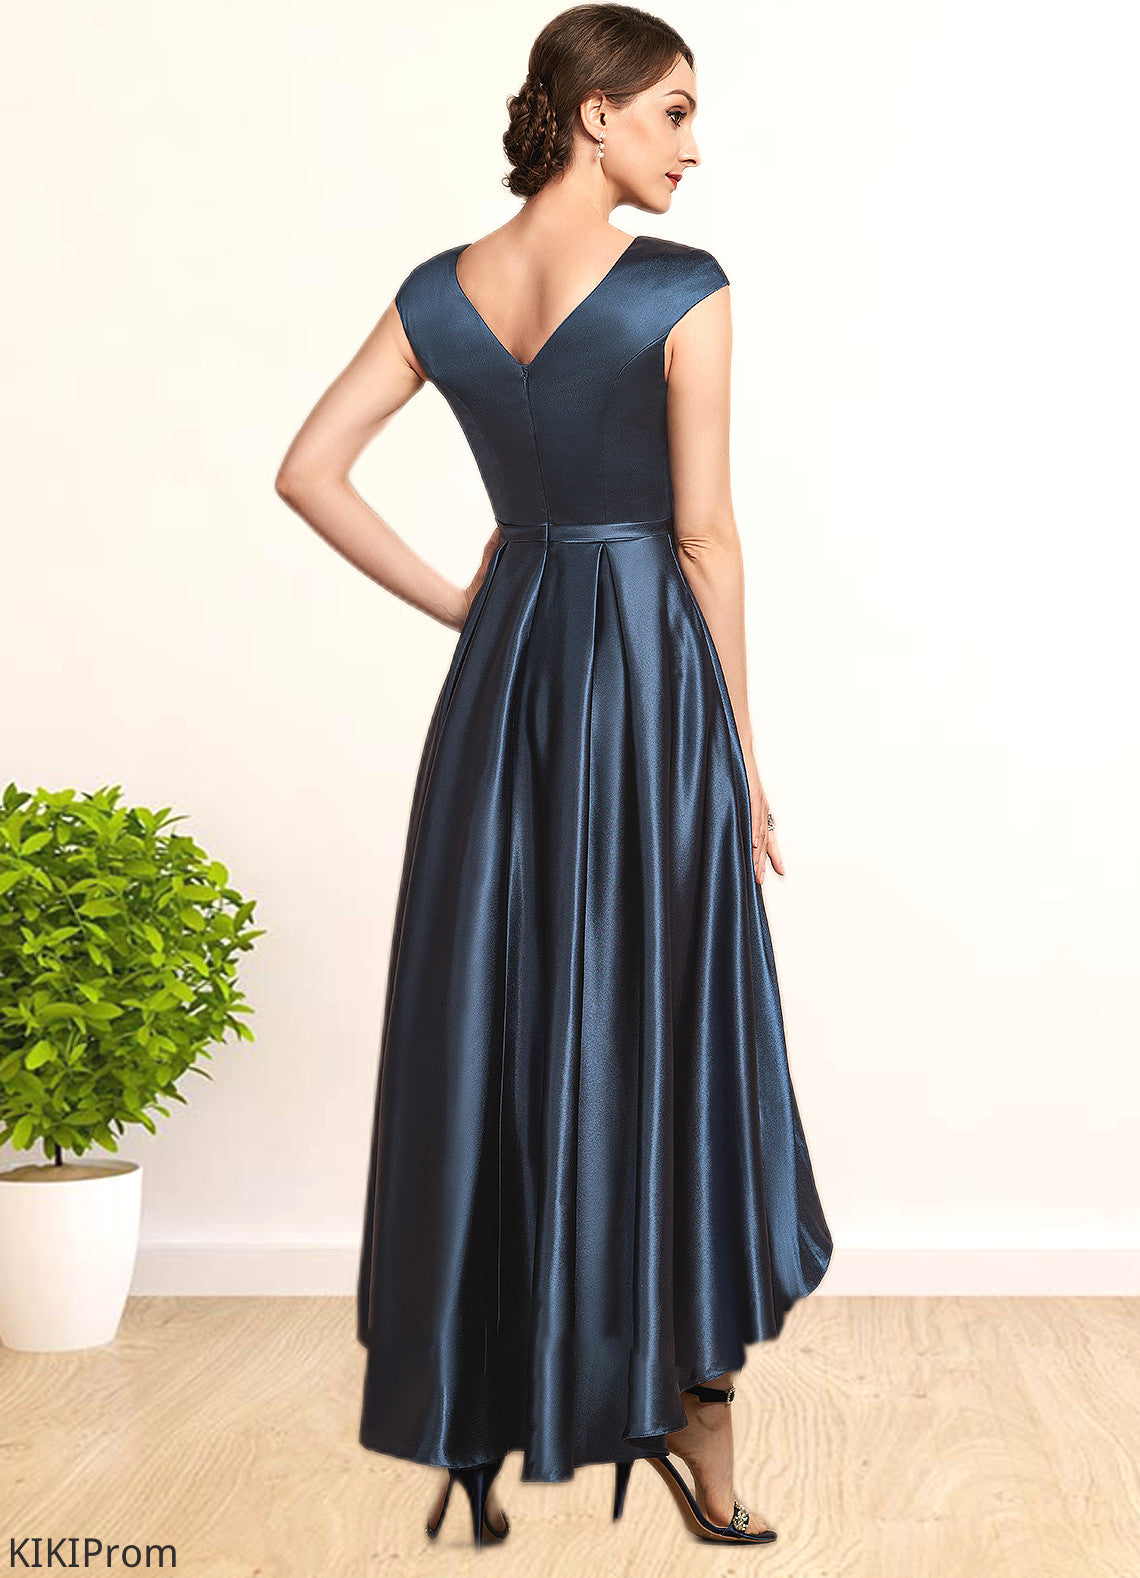 Kennedi A-Line Scoop Neck Asymmetrical Satin Mother of the Bride Dress With Bow(s) Pockets DZ126P0014976